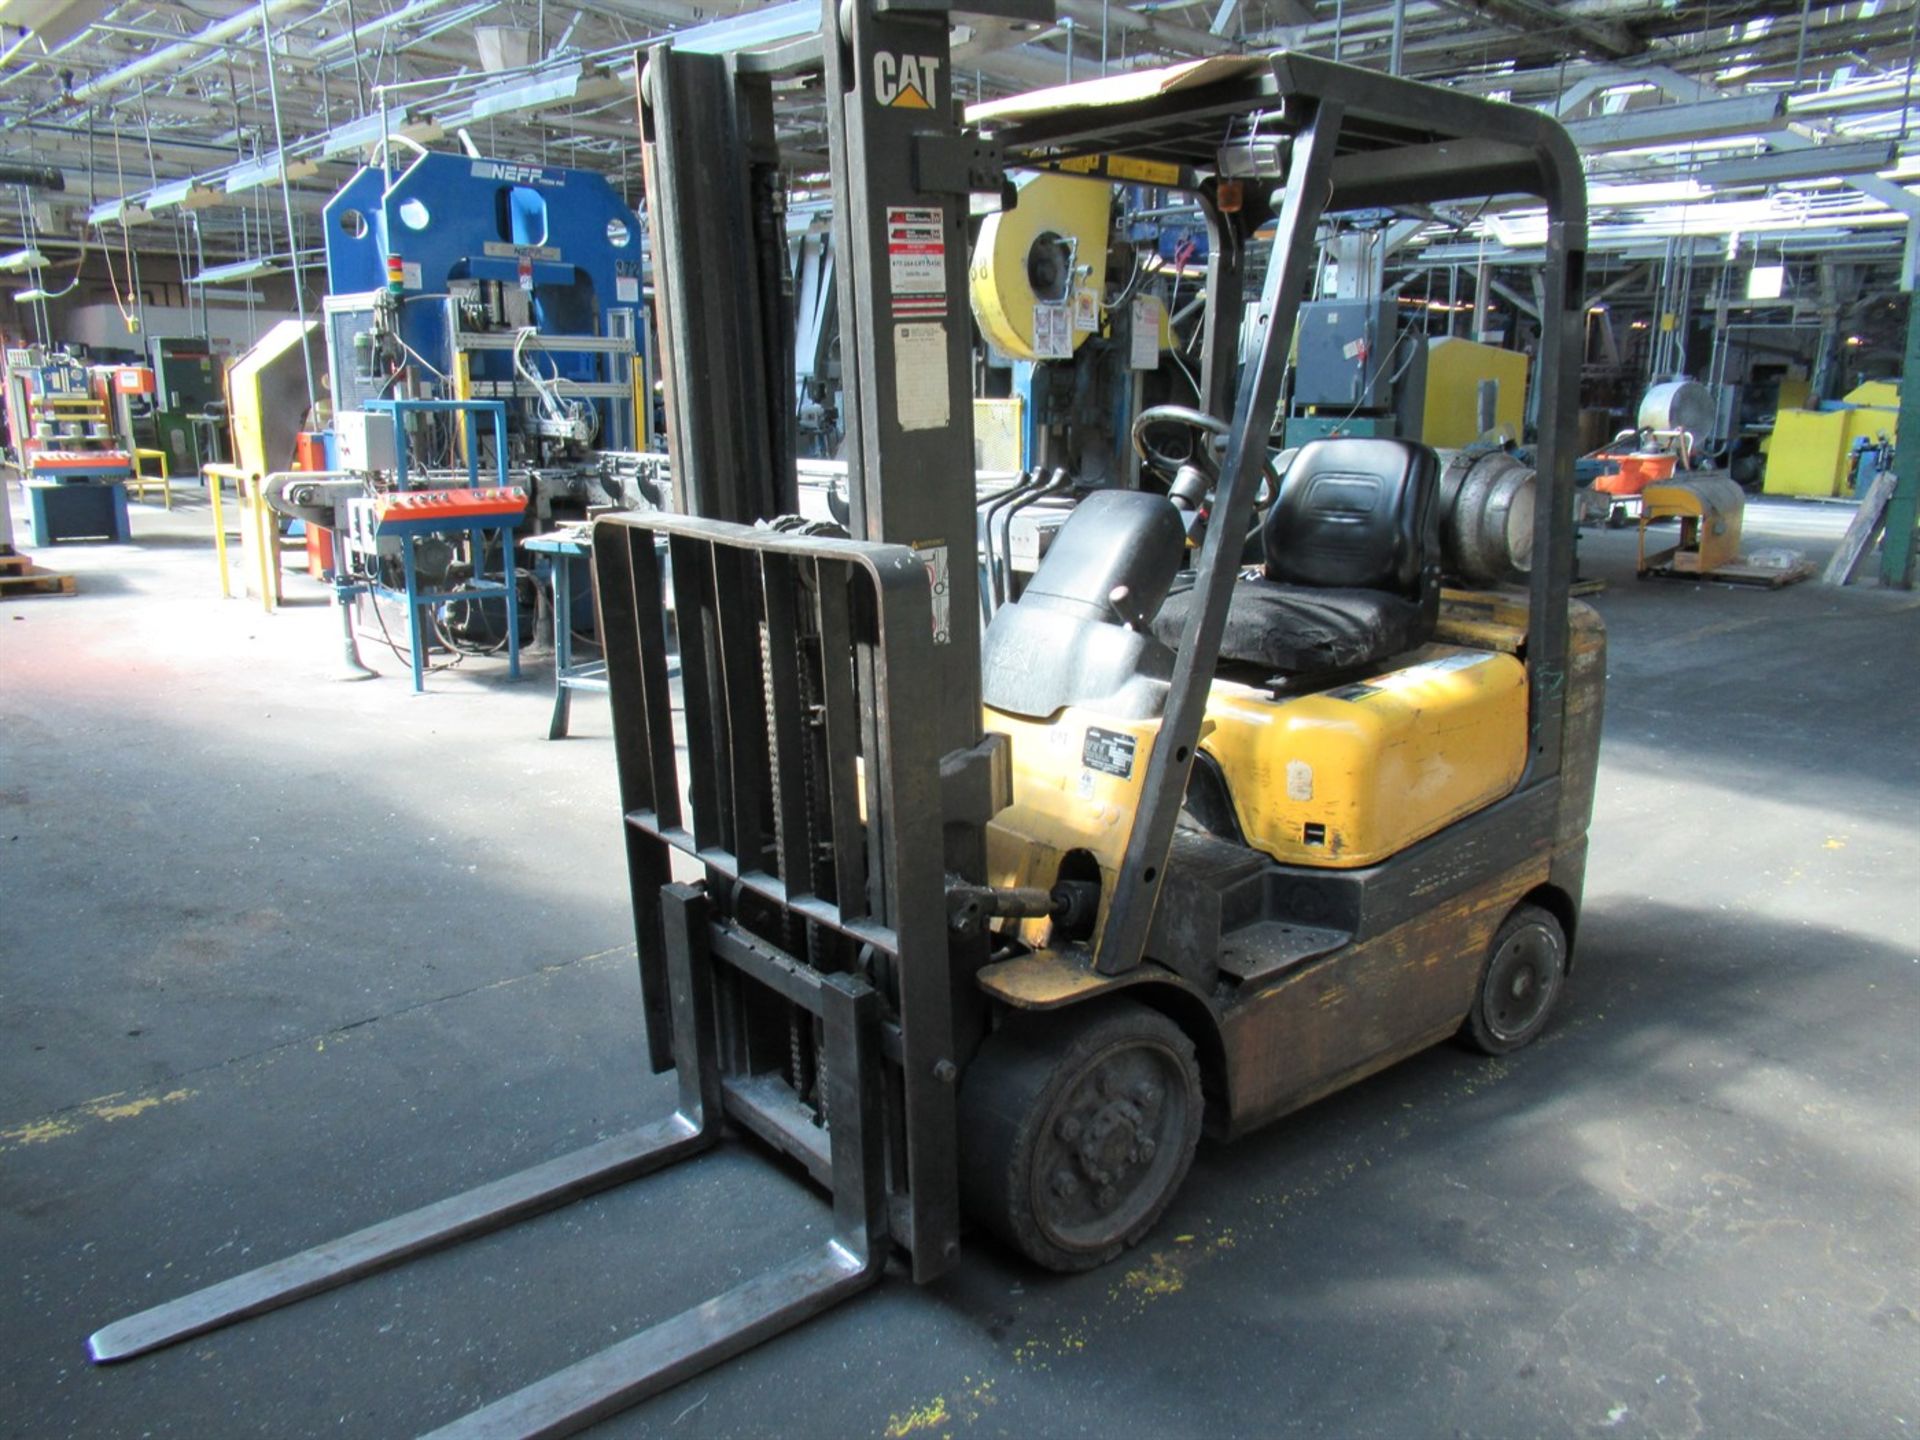 CATERPILLAR GC20K LP Forklift, s/n AT82C01839, 4000 Lb. Capacity, 2-Stage Mast, 42” Fork Length - Image 3 of 5